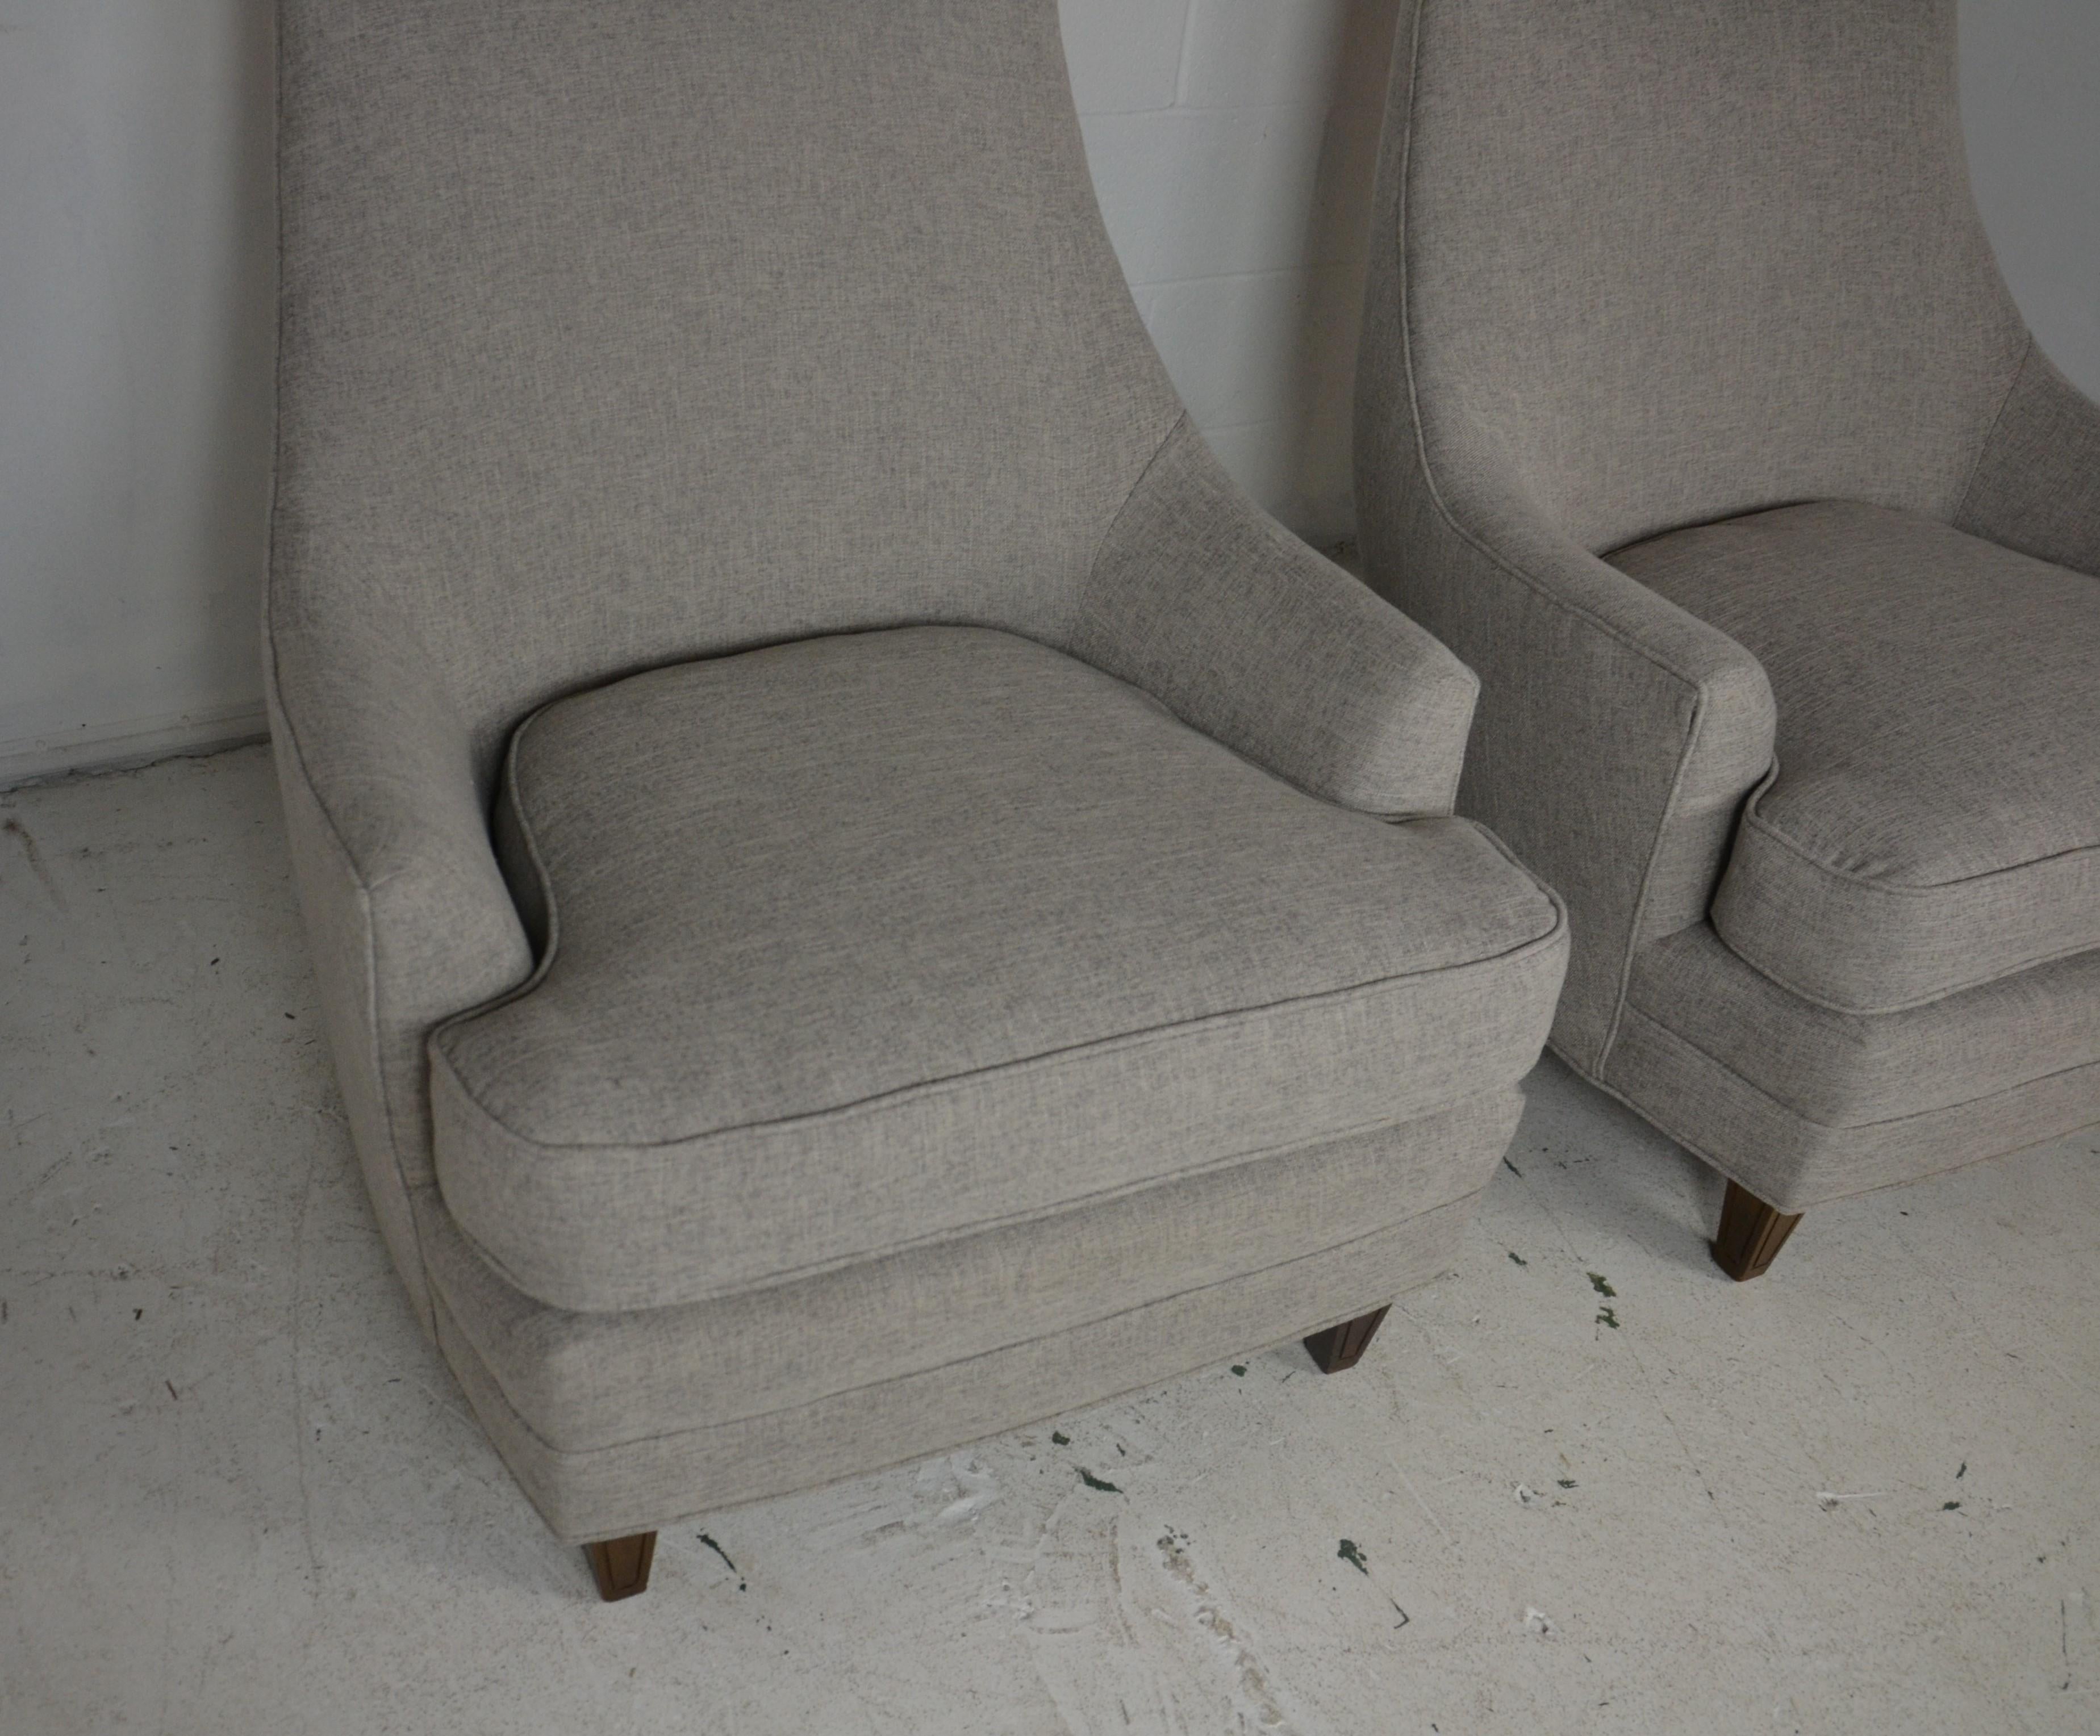 Pair of Mid-Century Club Chairs. Newly upholstered in light gray fabric.